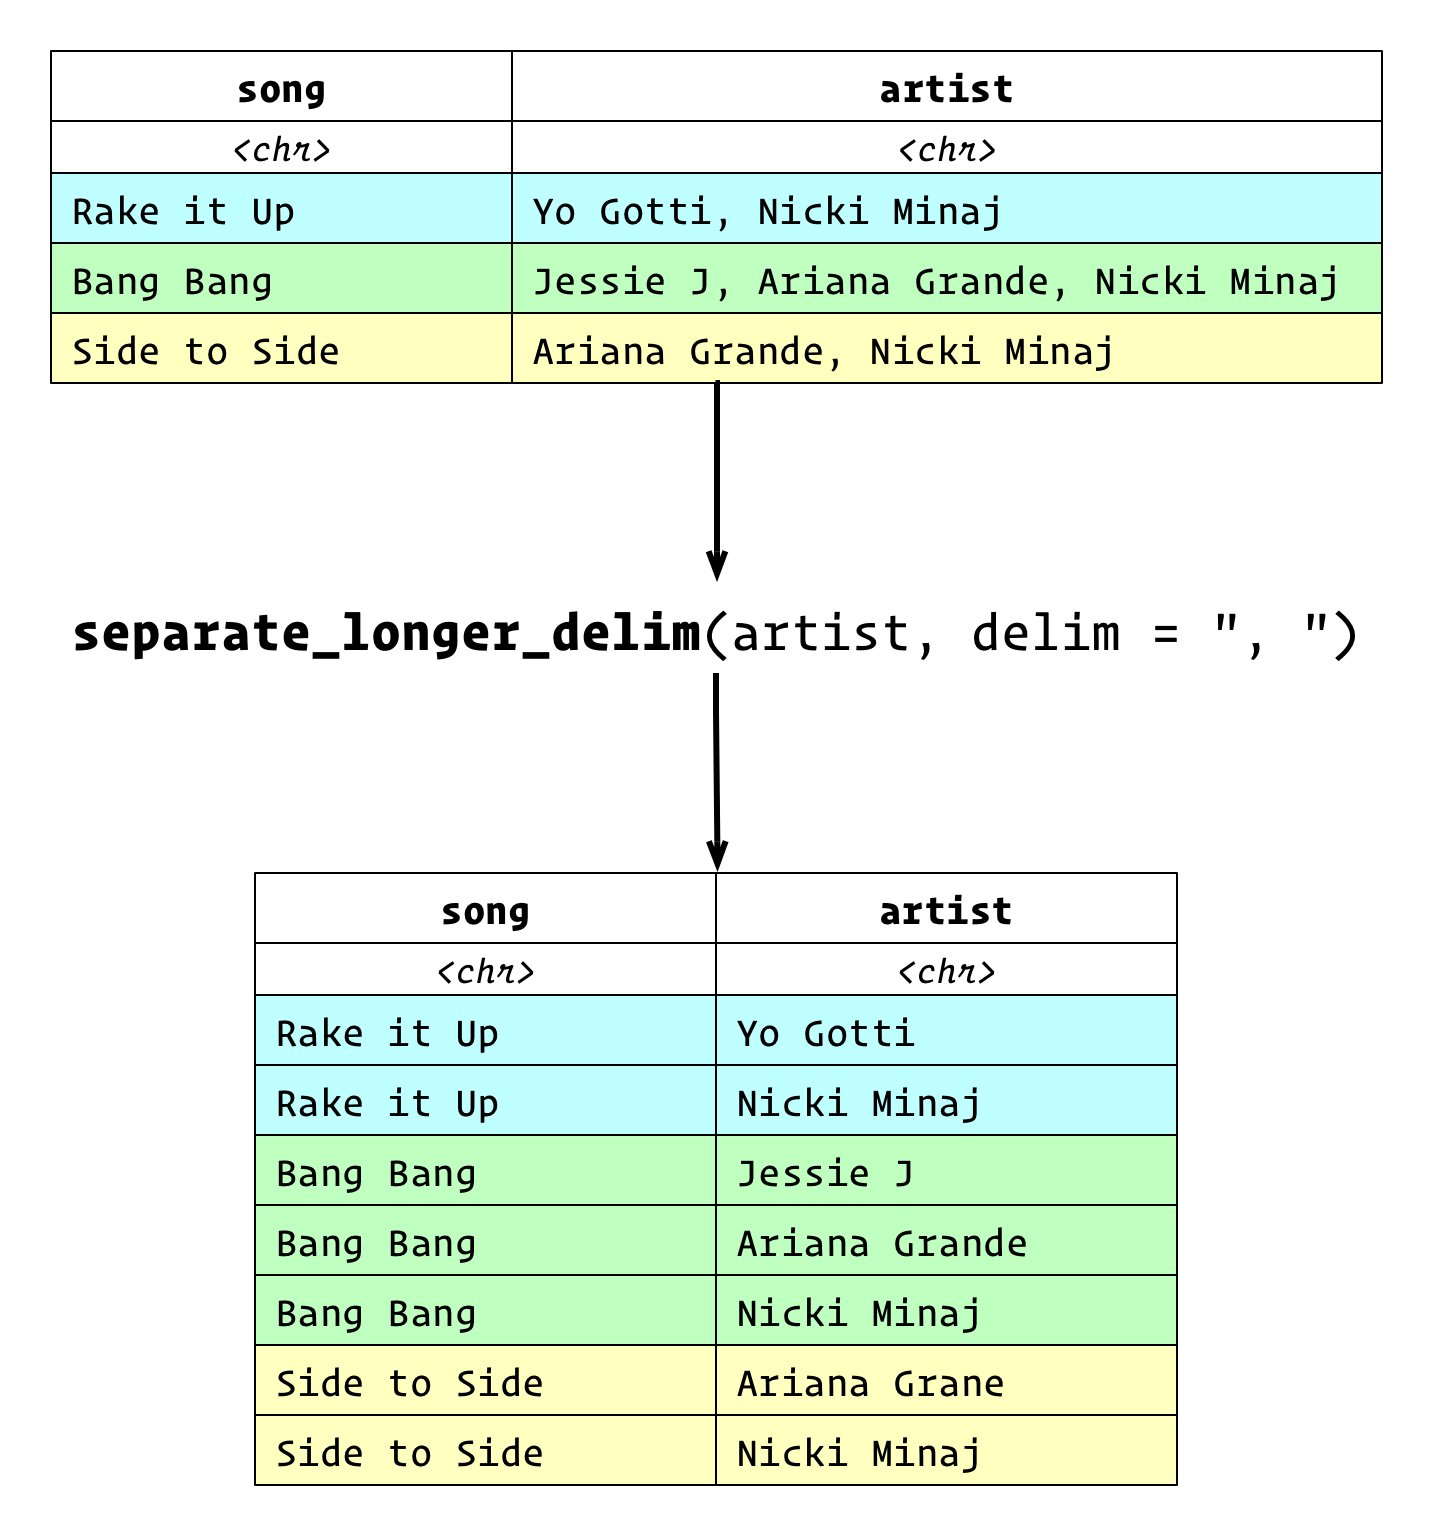 A data frame with two character columns, song and artist, that contains multiple artists in the artist column as a string separated by commas is transformed into a tidy data frame with one song per row and one artist per row using separate_longer_delim().